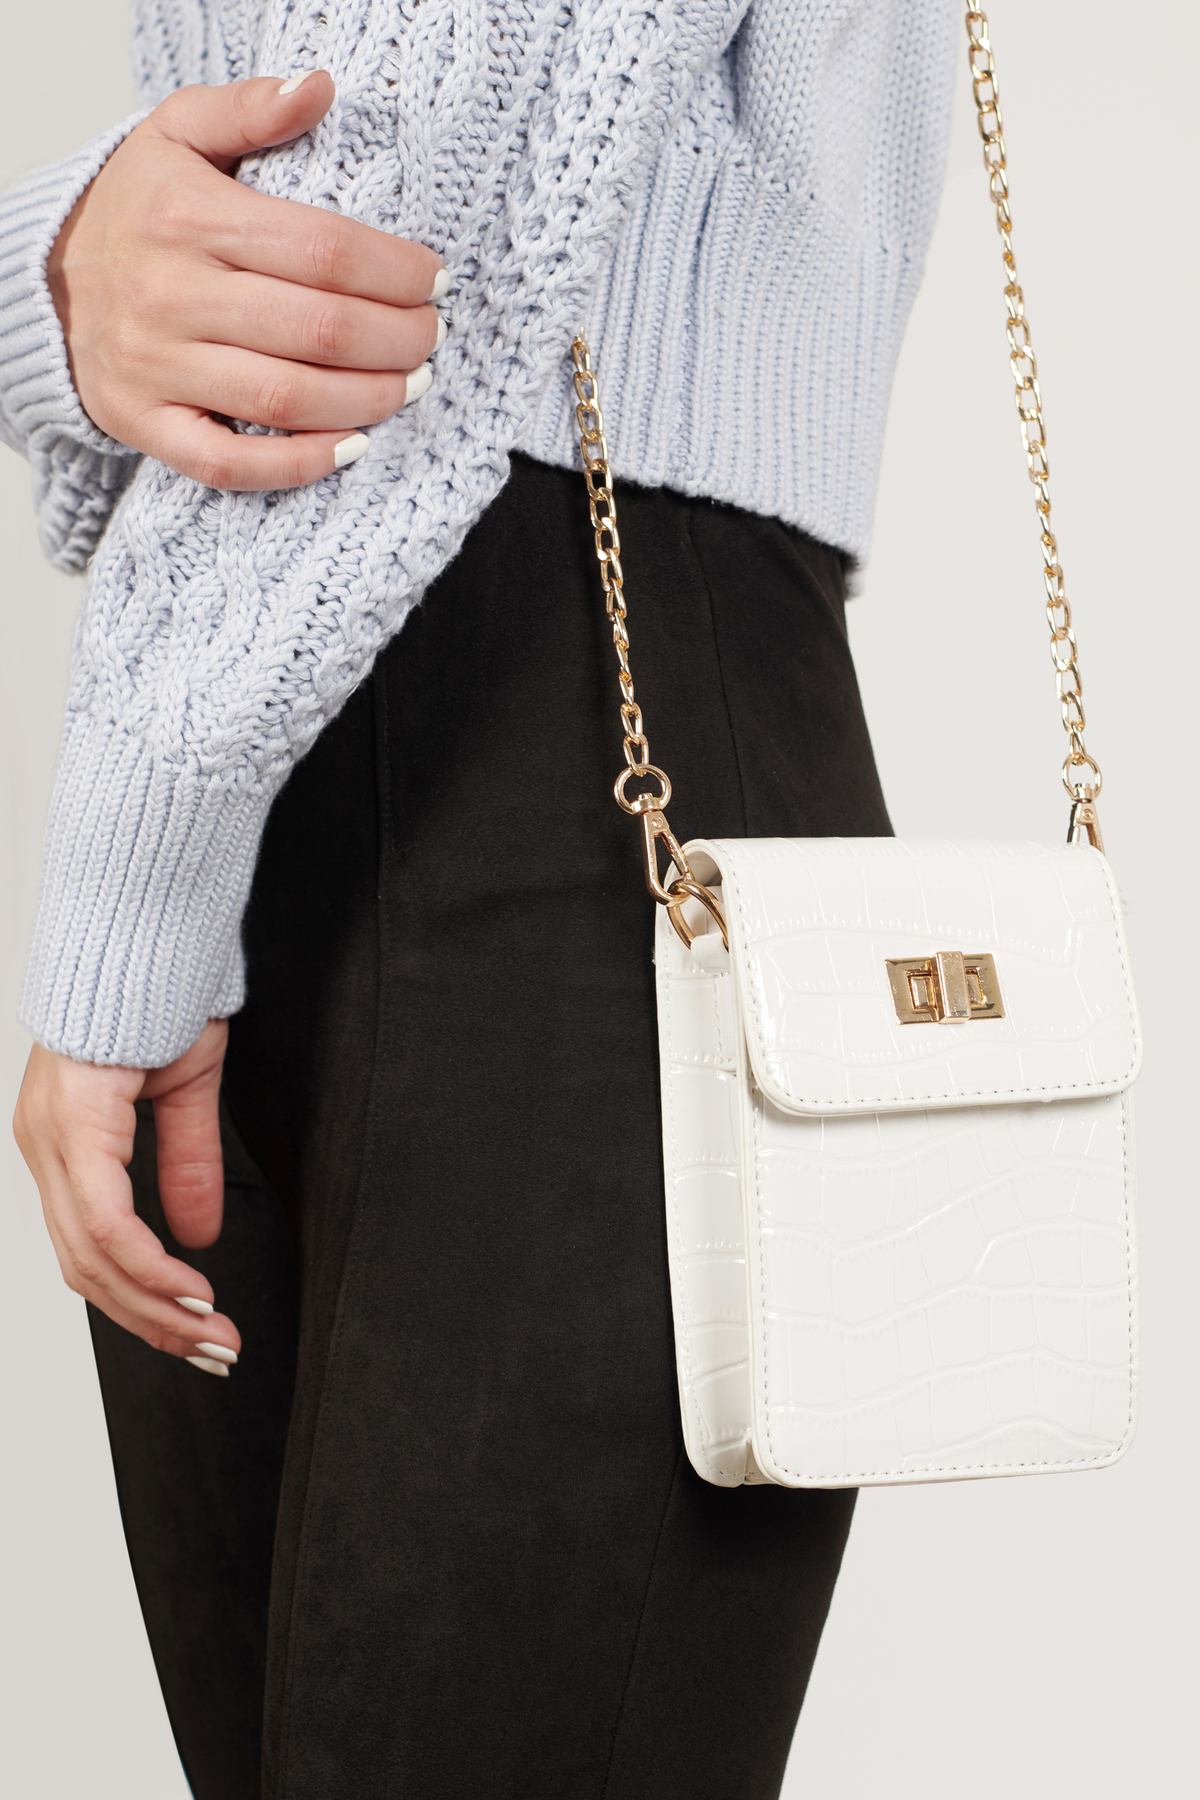 Second Guessing White Croc Cell Phone Crossbody Bag - $68 | Tobi US